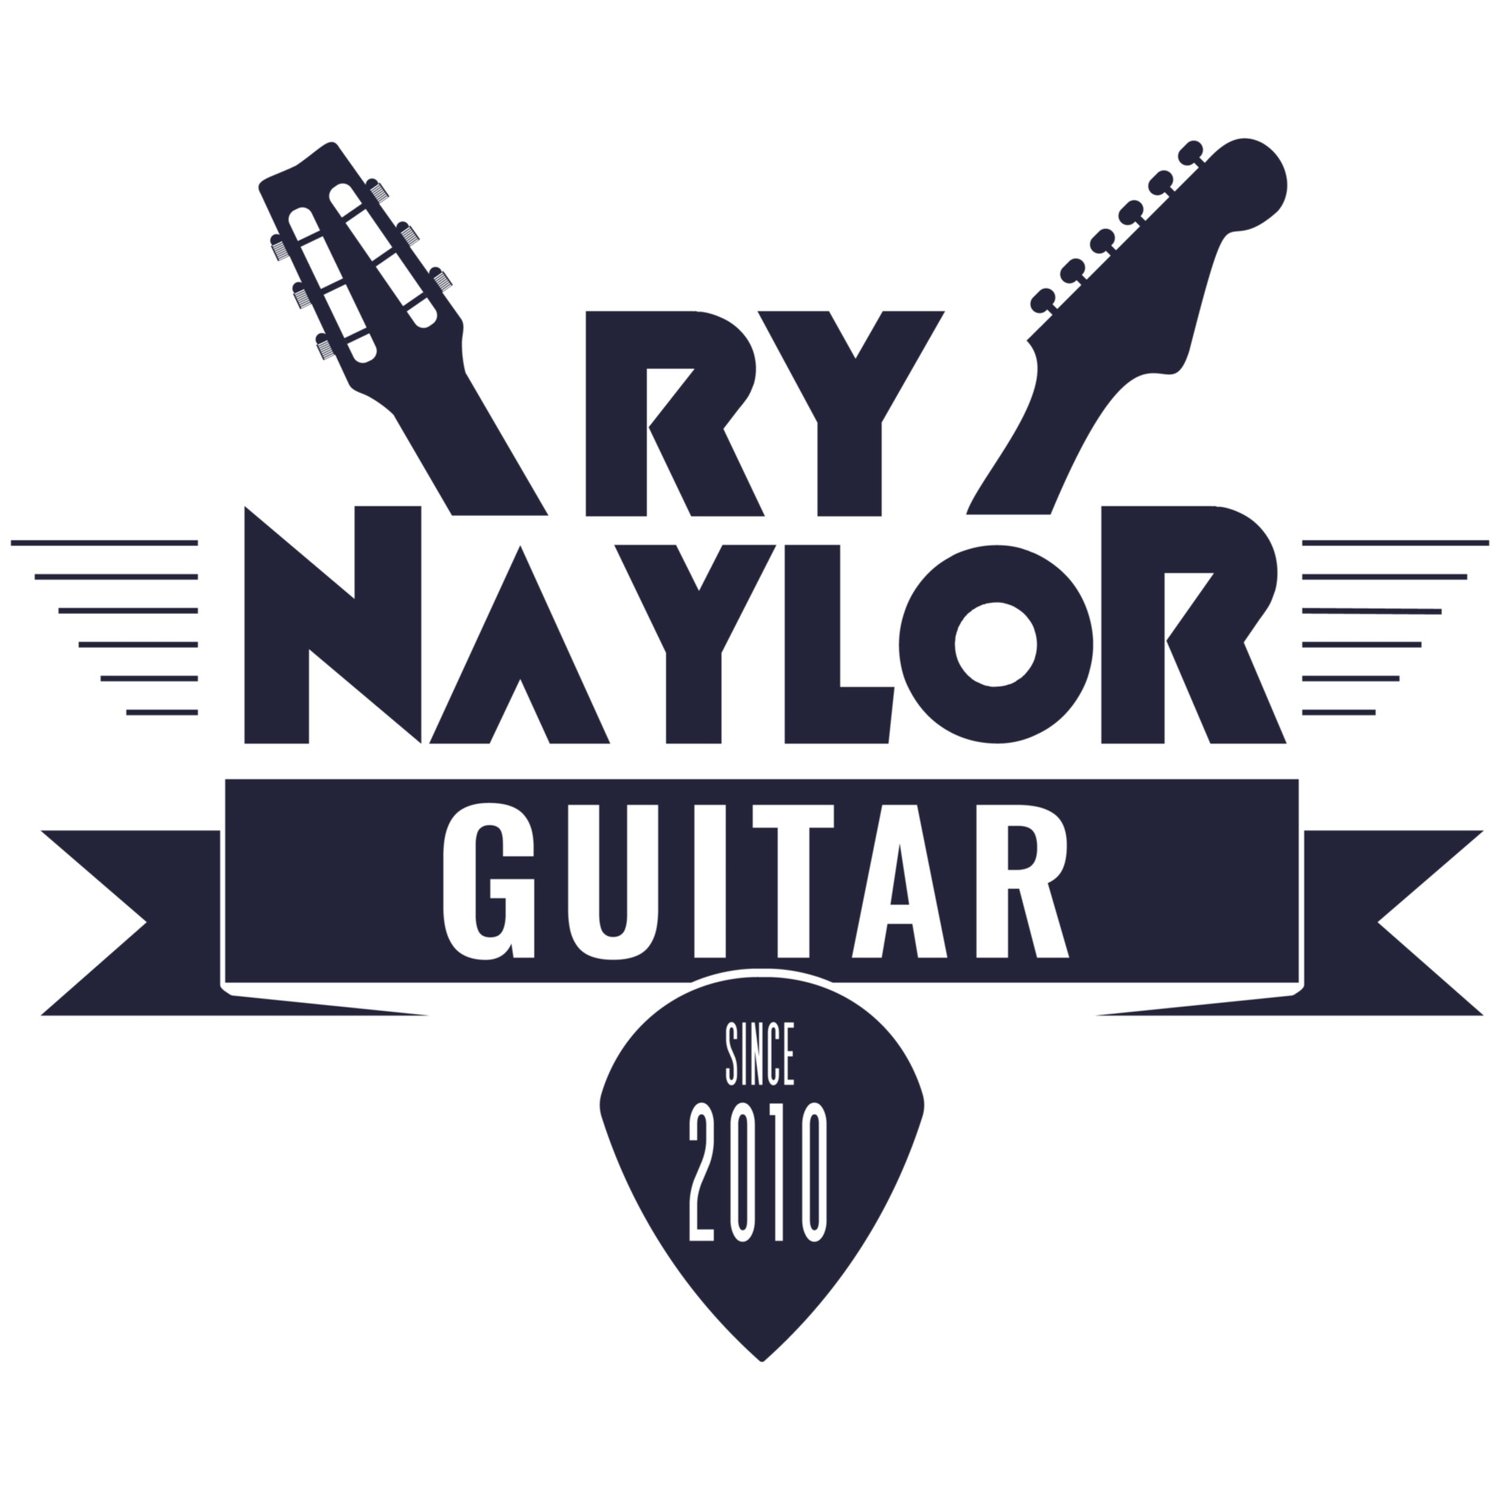 Guitar Music Theory Lessons by Ry Naylor